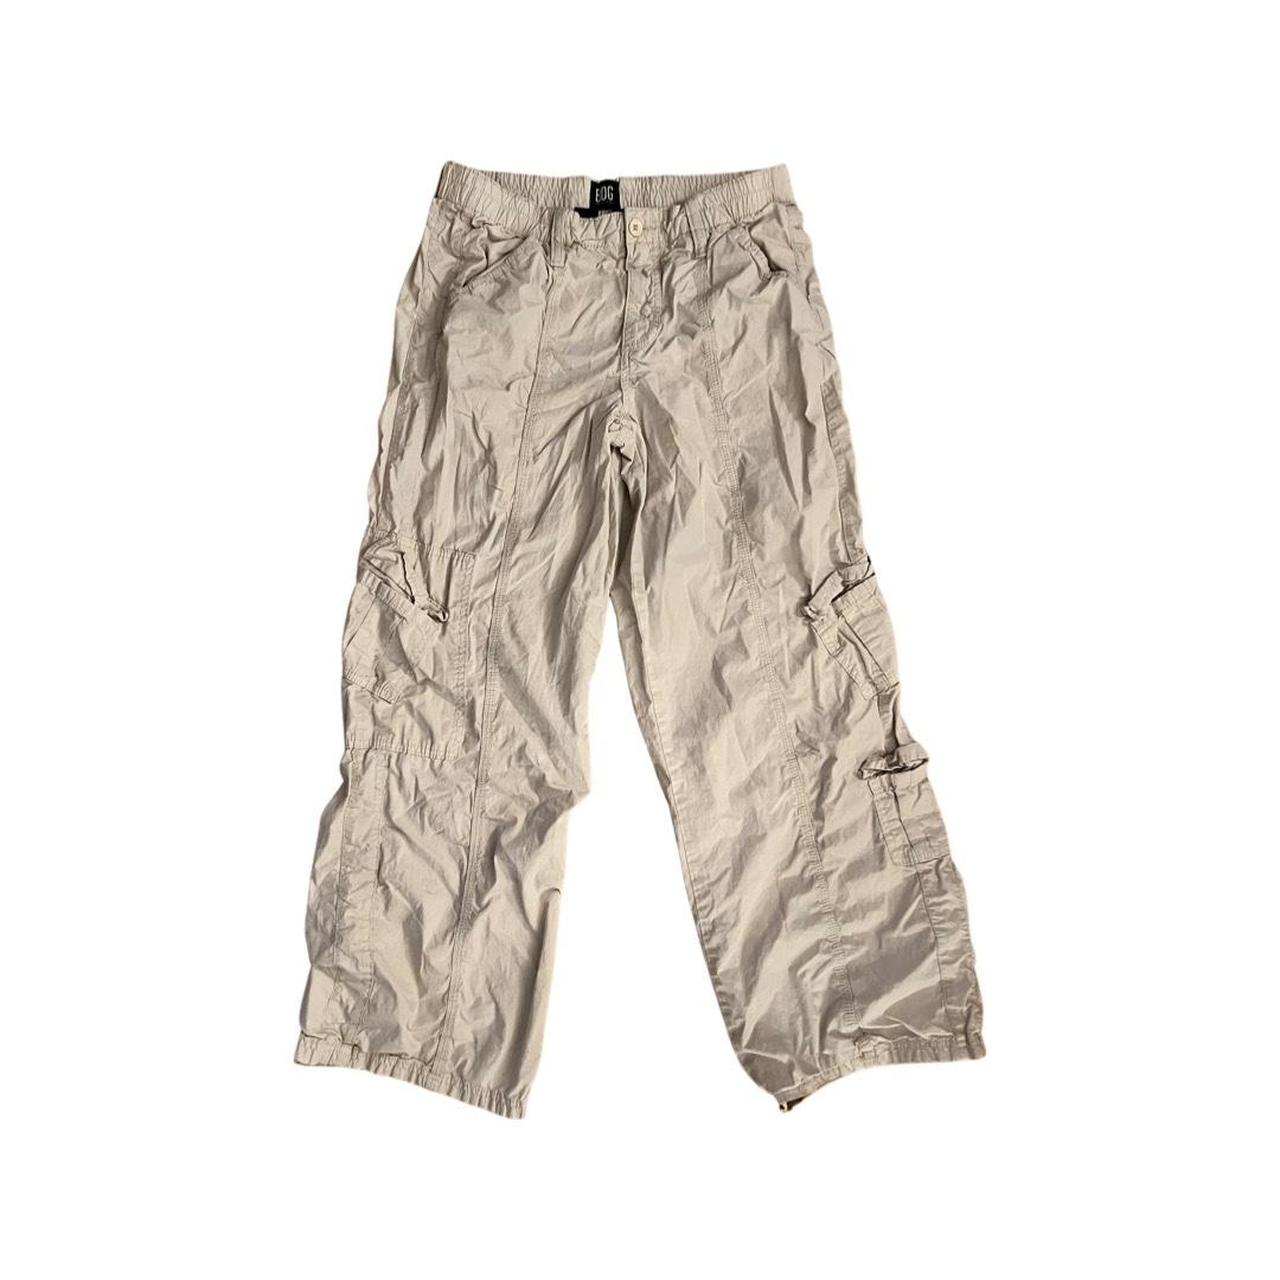 BDG urban outfitter low rise y2k cargos sold out on... - Depop